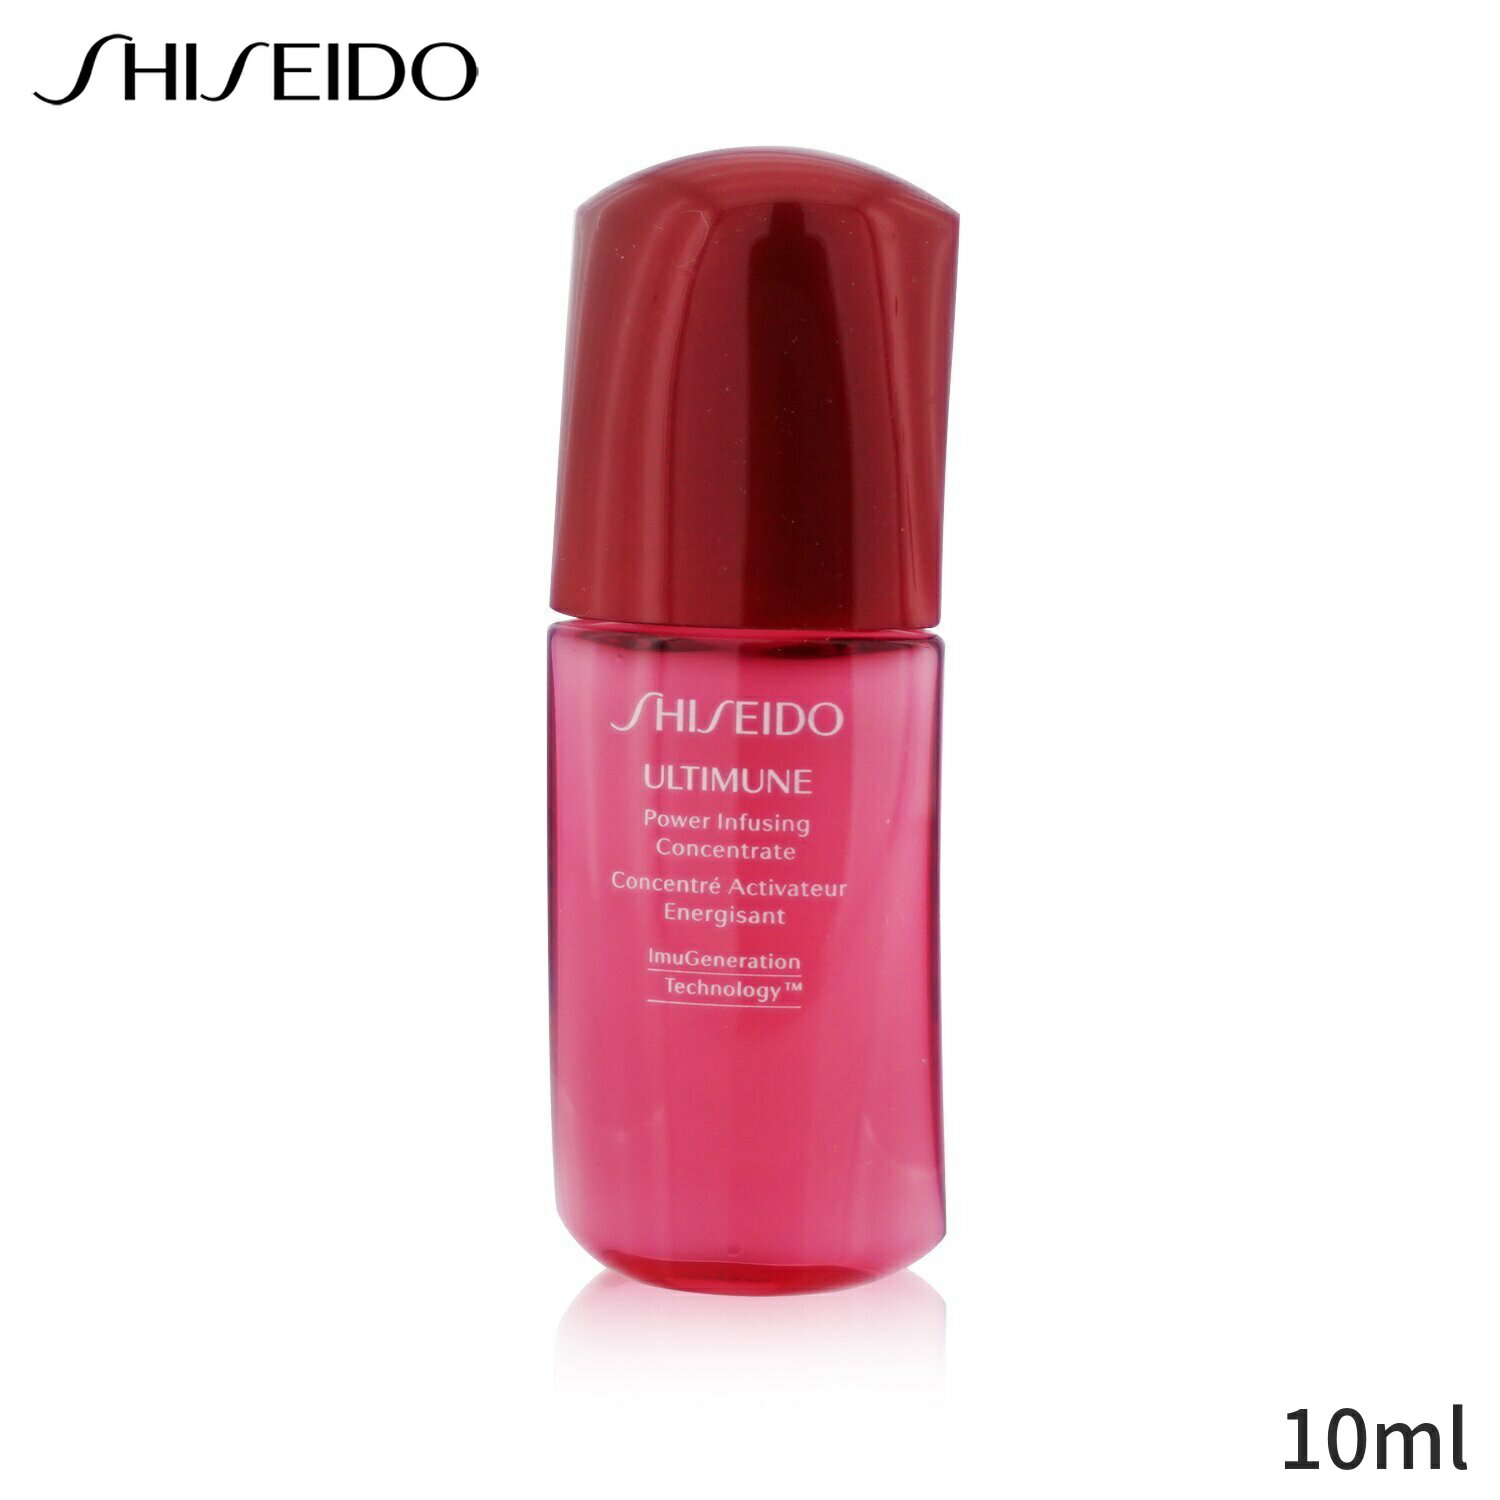 Ʋ Ʊ Shiseido Ultimune Power Infusing Concentrate - ImuGeneration T...